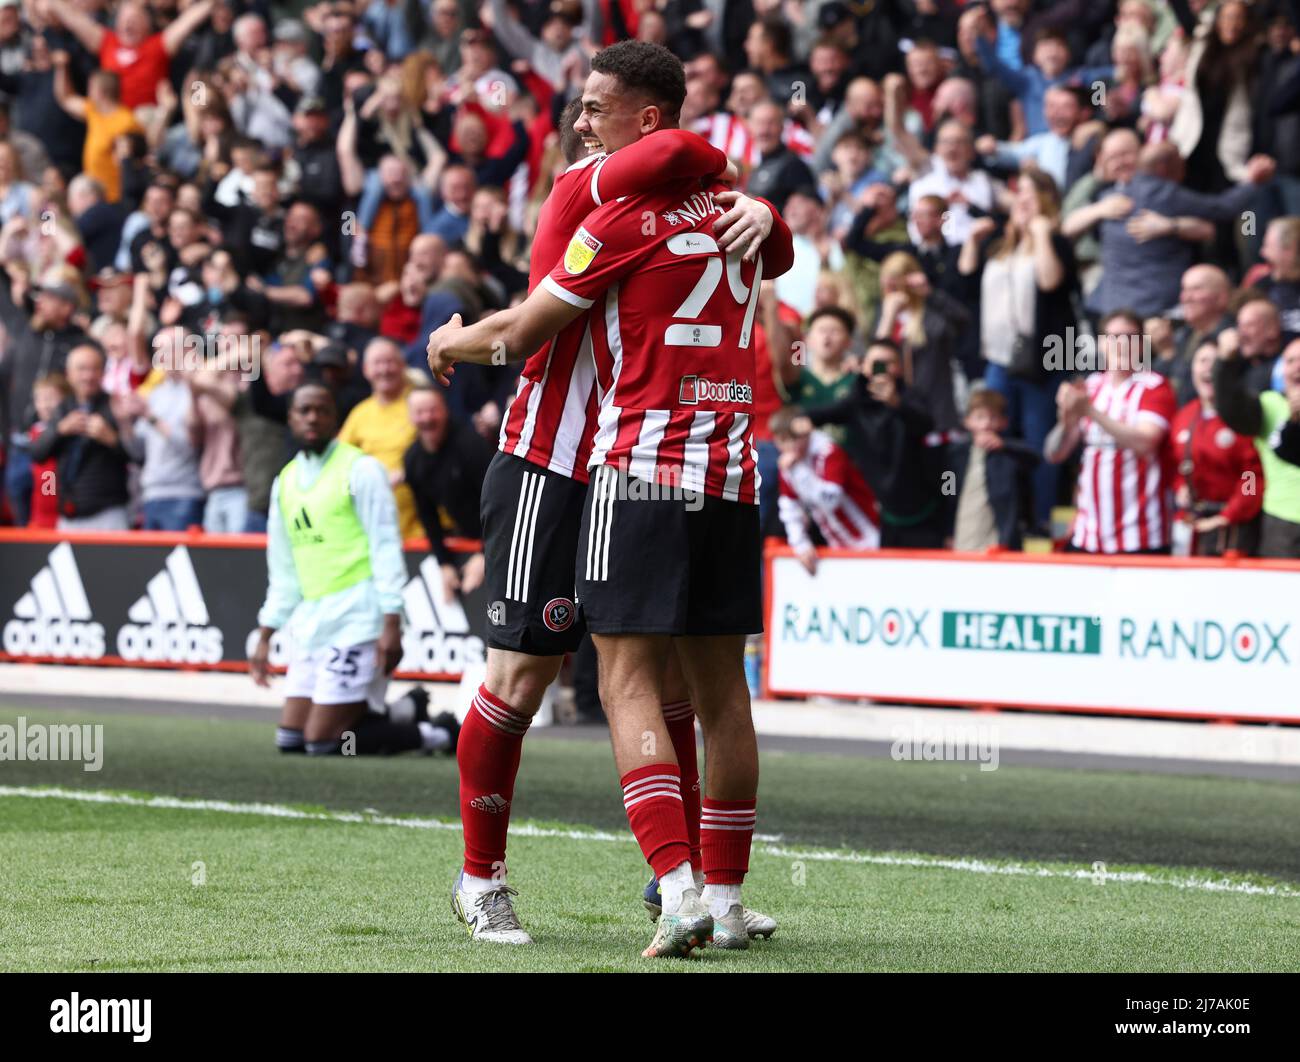 Sheffield, England, 7th May 2022.   lliman Ndiaye (R) of Sheffield Utd celebrates their second goal scored by Morgan Gibbs-White with John Fleck during the Sky Bet Championship match at Bramall Lane, Sheffield. Picture credit should read: Darren Staples / Sportimage Credit: Sportimage/Alamy Live News Stock Photo